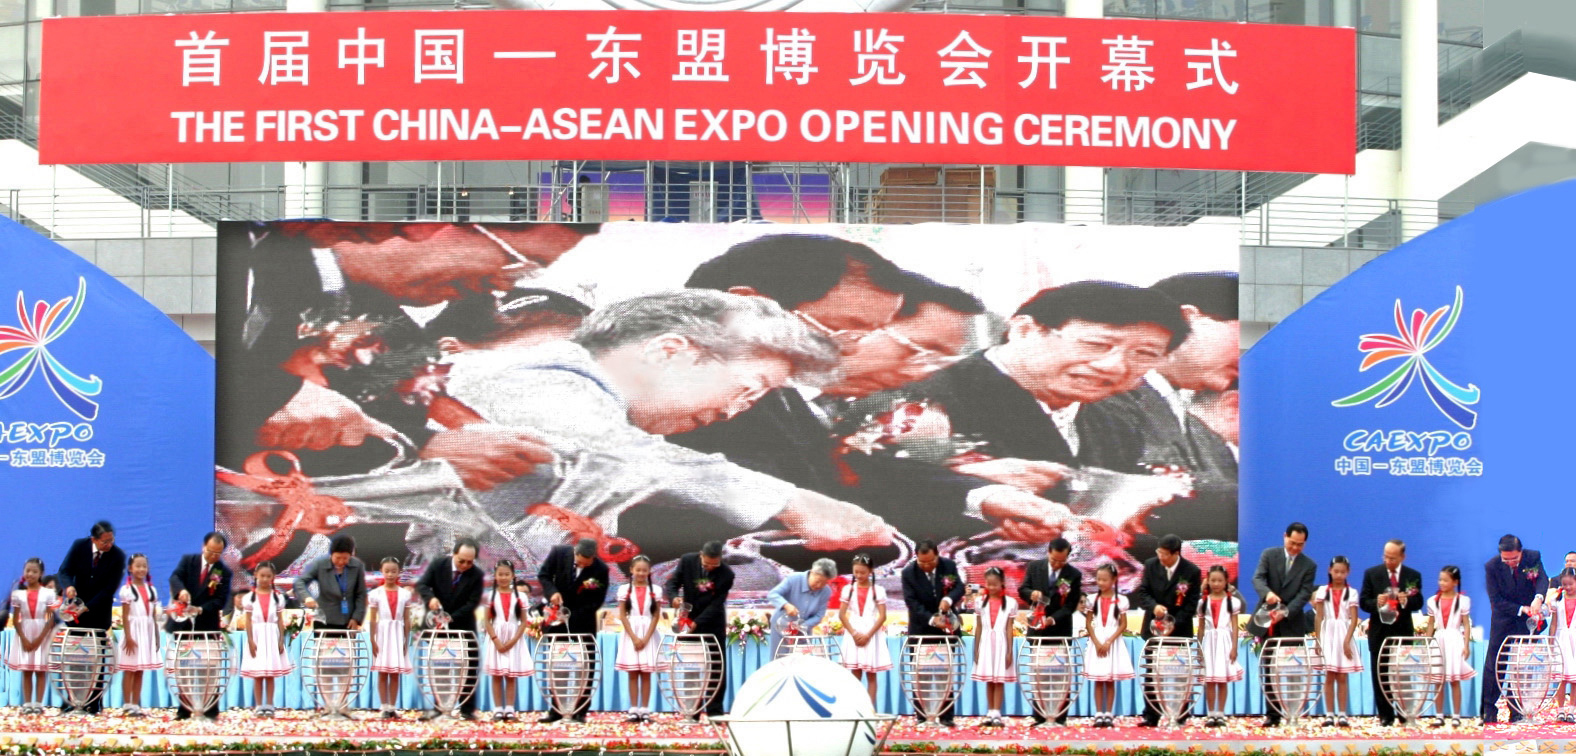 The first China-ASEAN Expo